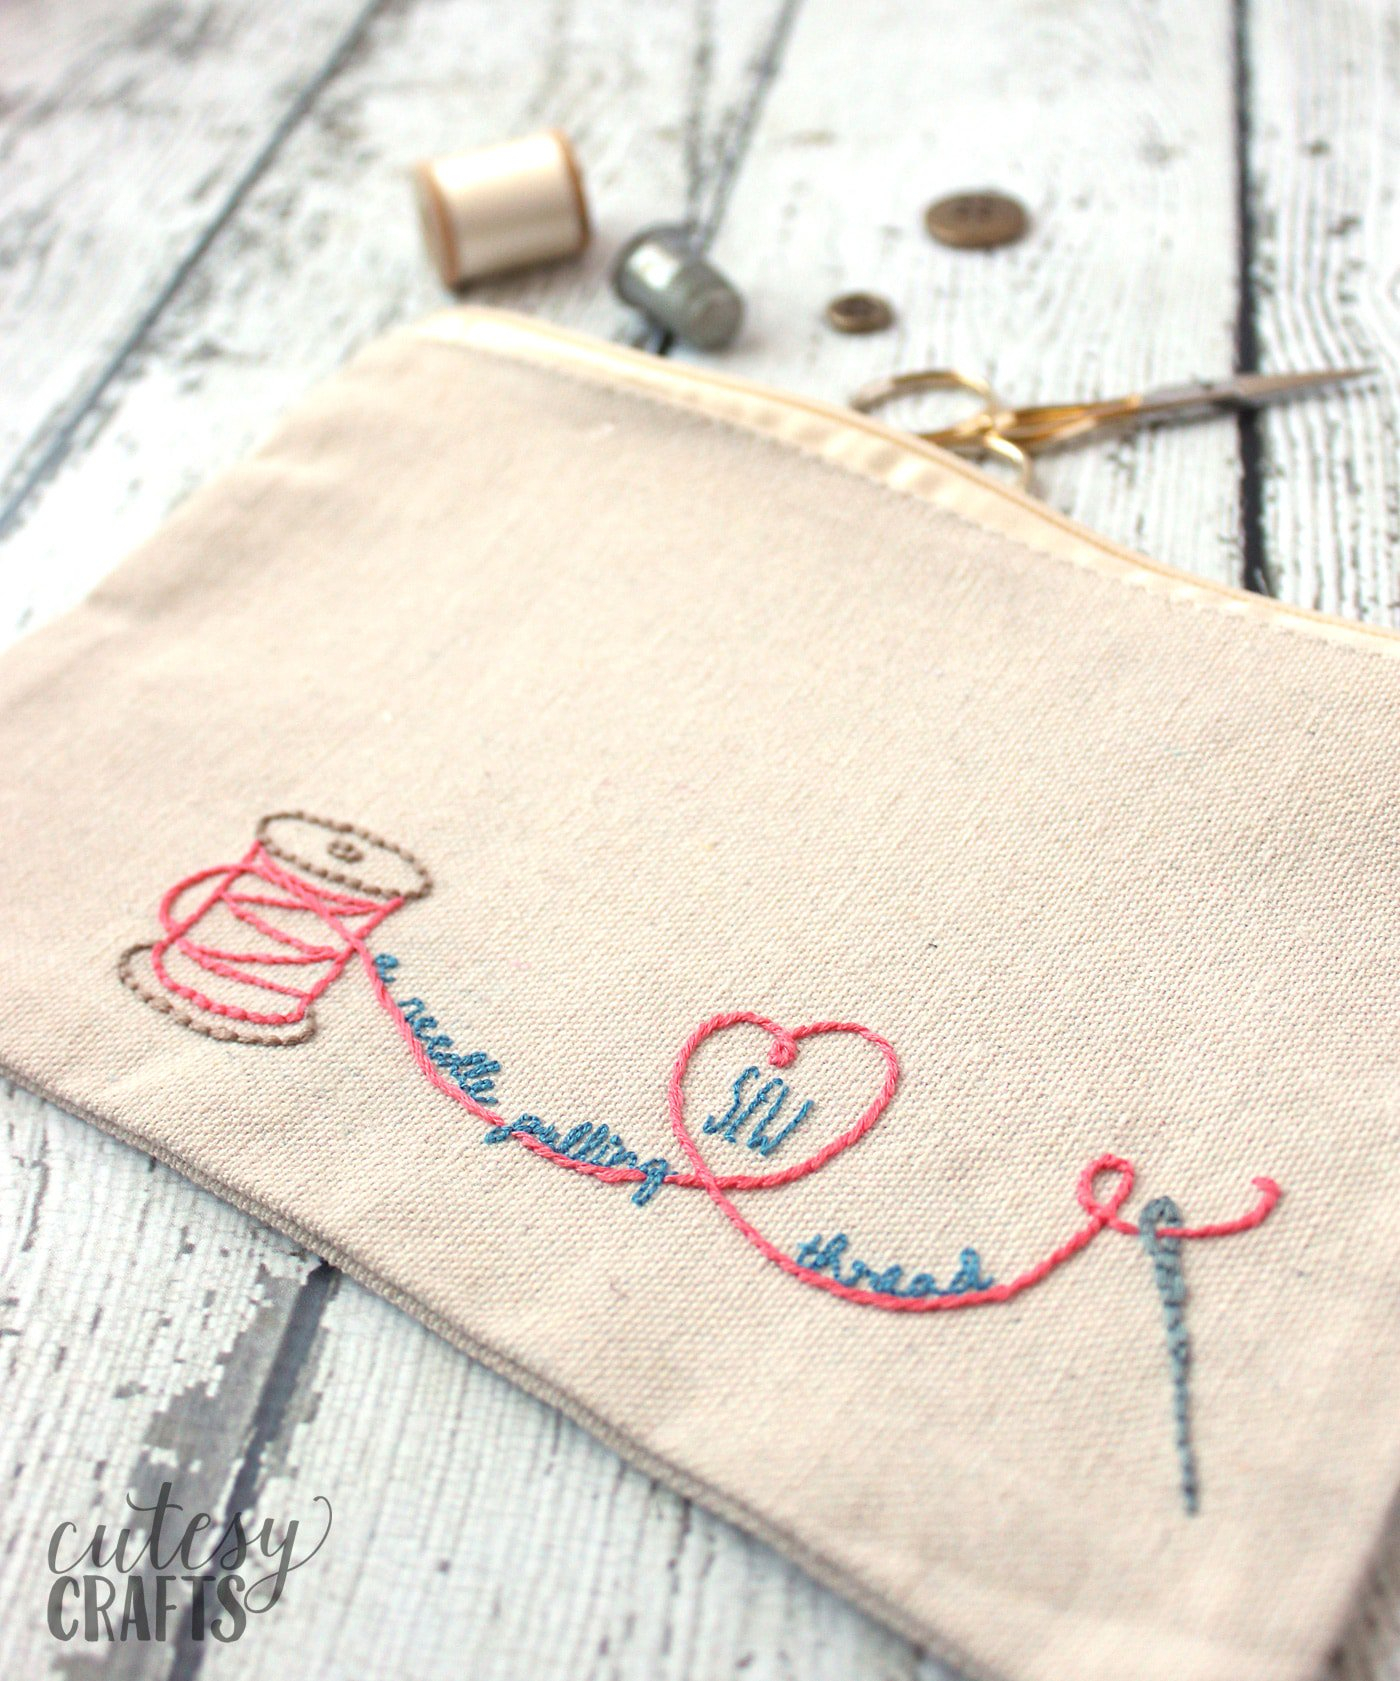 How To Design Embroidery Patterns By Hand Adorable Diy Sew A Needle Pulling Thread Bag Free Hand